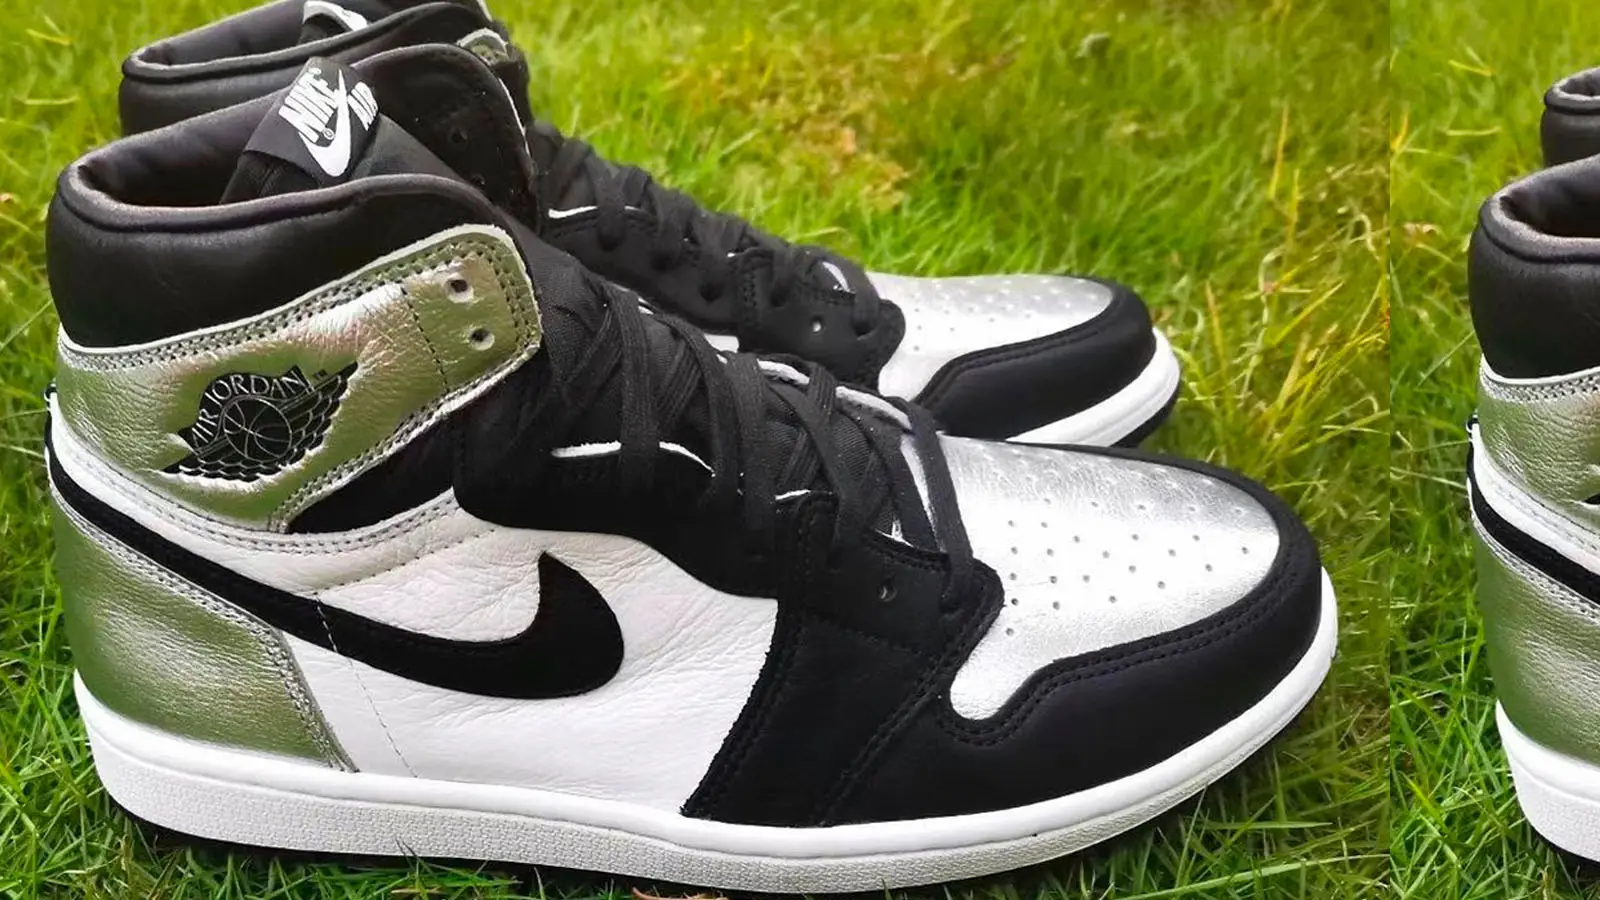 Get A Detailed First Look At The Air Jordan 1 Retro High OG 'Silver Toe' |  The Sole Supplier